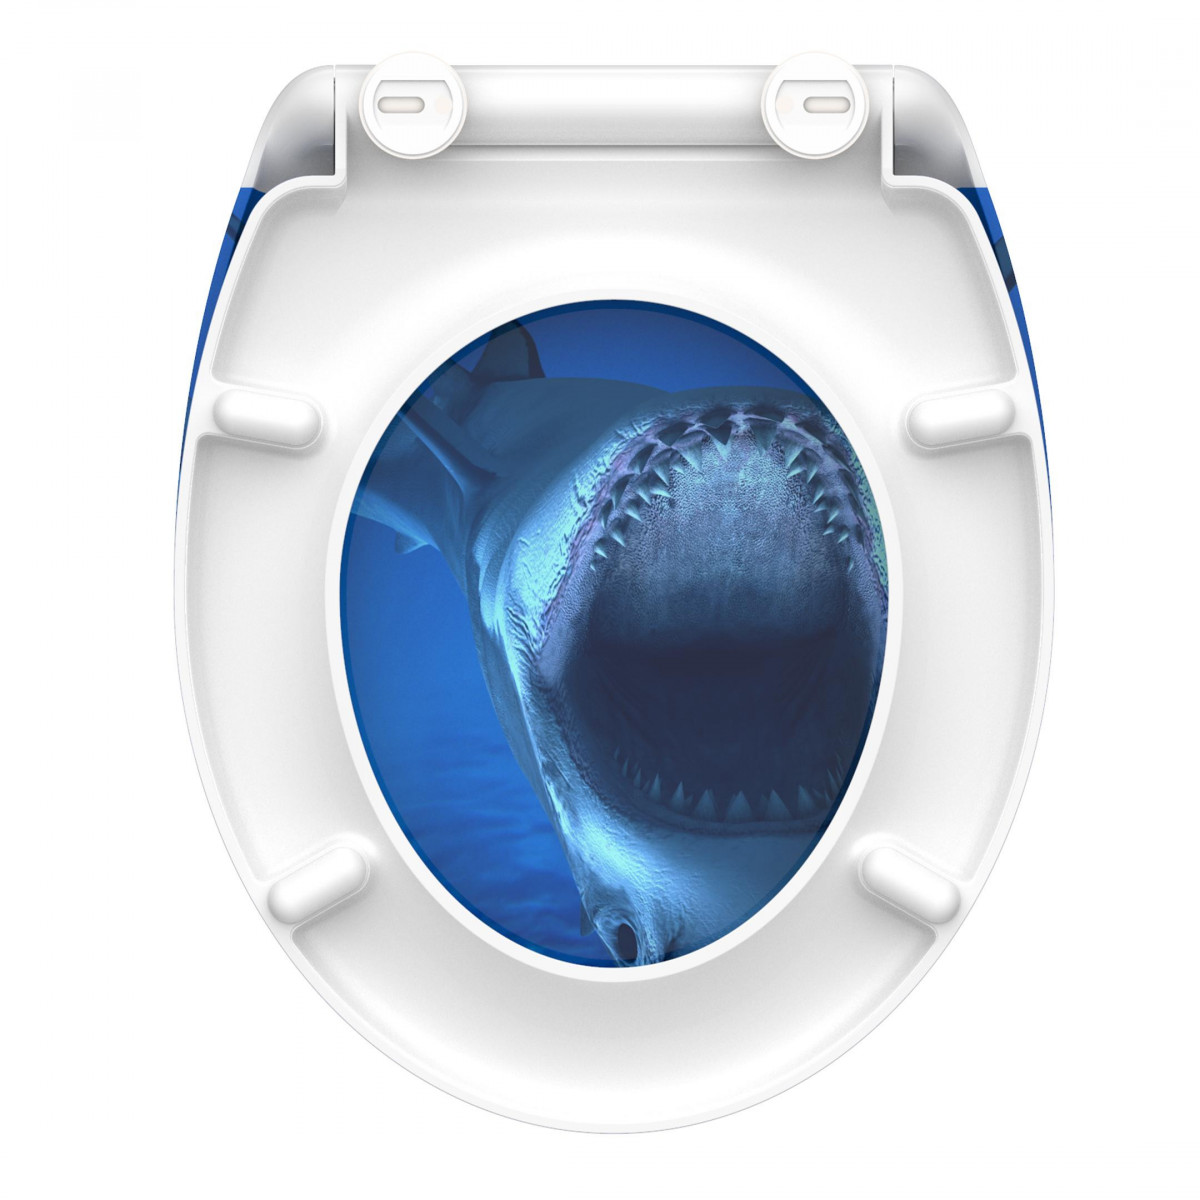 Duroplast Toilet Seat SHARK with Soft Close and Quick Release